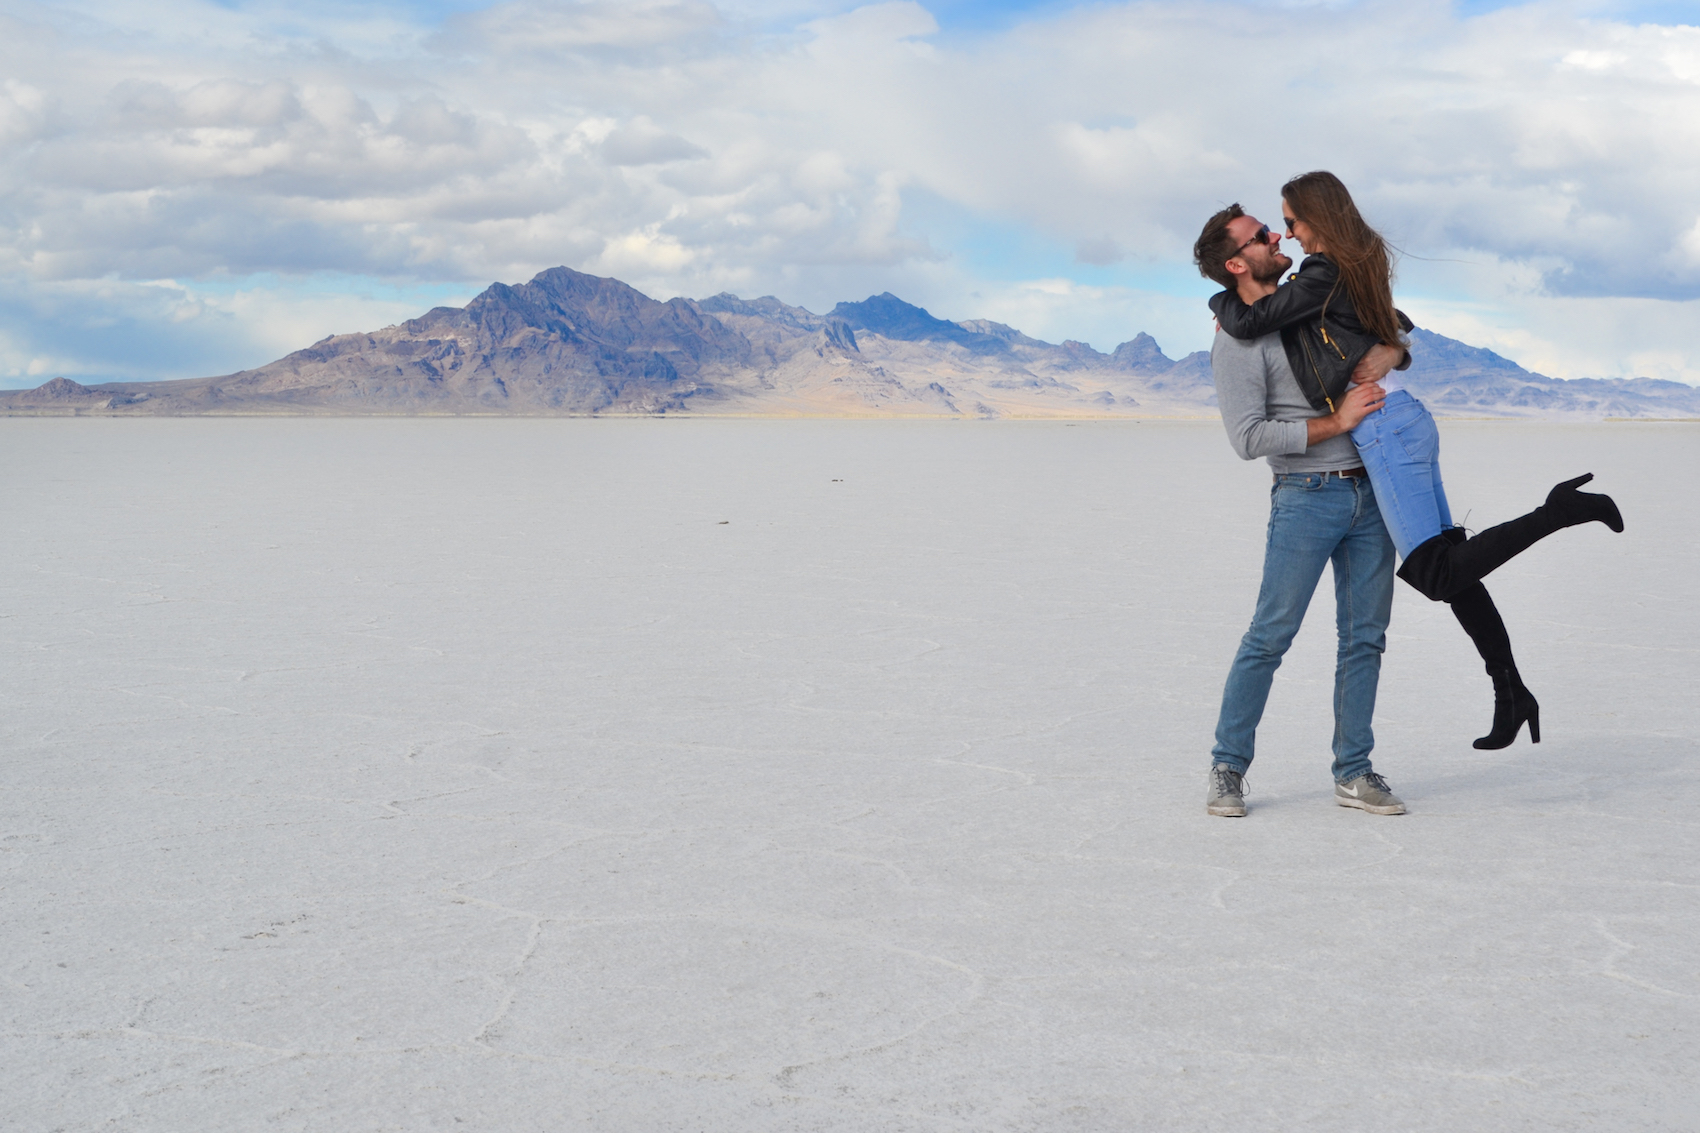 The Bonneville Salt flats are an endless view of white salt with purple mountains in the distance.